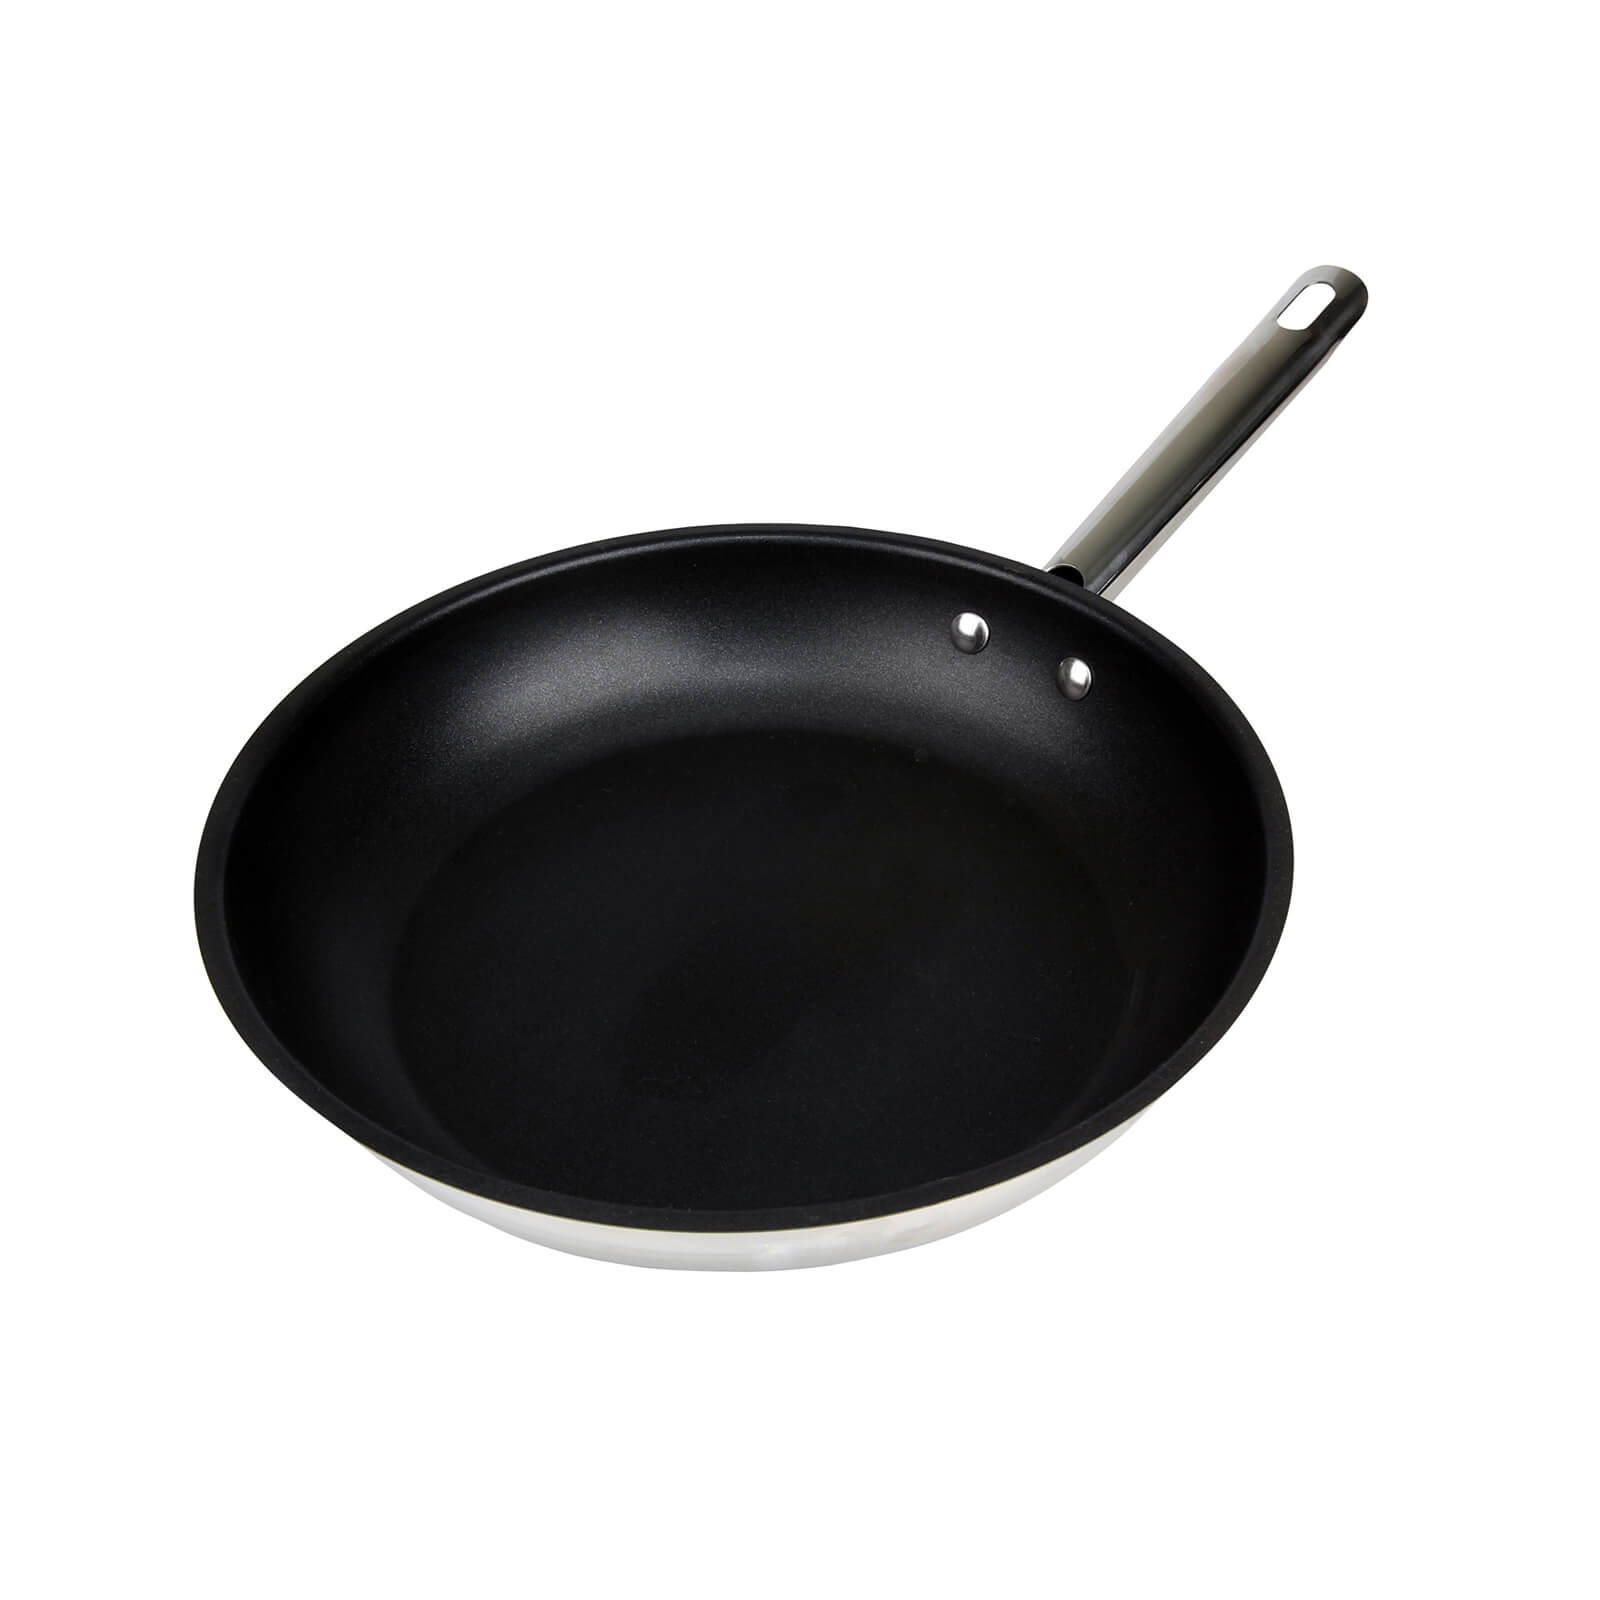 Denby Stainless Steel 3 Piece Frying Pan Set